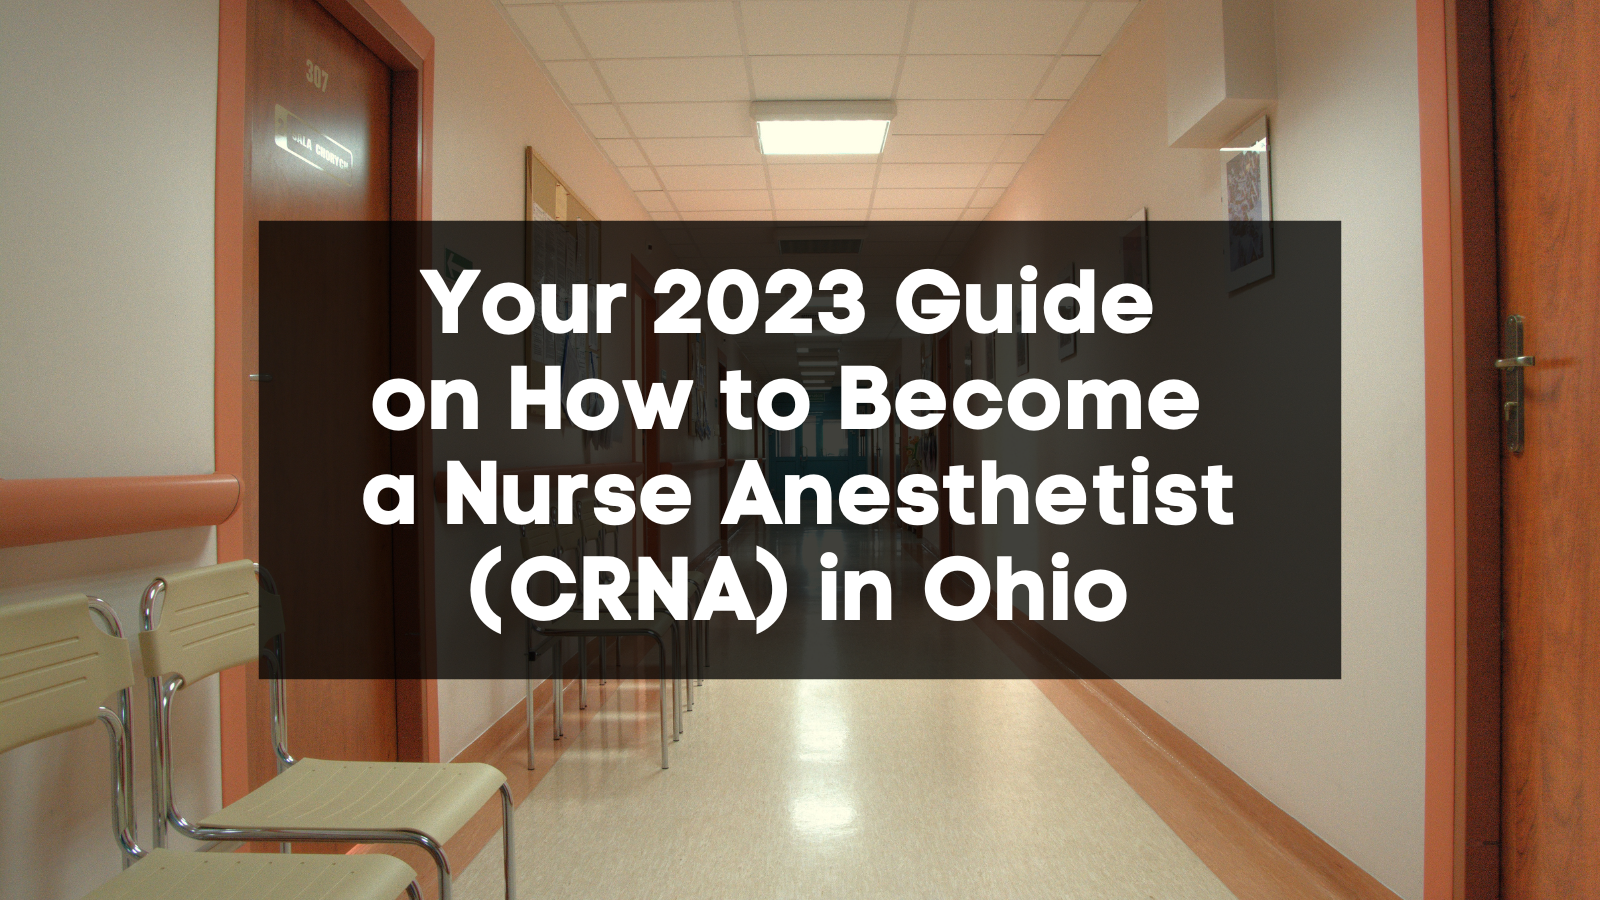 Your 2023 Guide on How to Become a Nurse Anesthetist (CRNA) in Ohio featured image